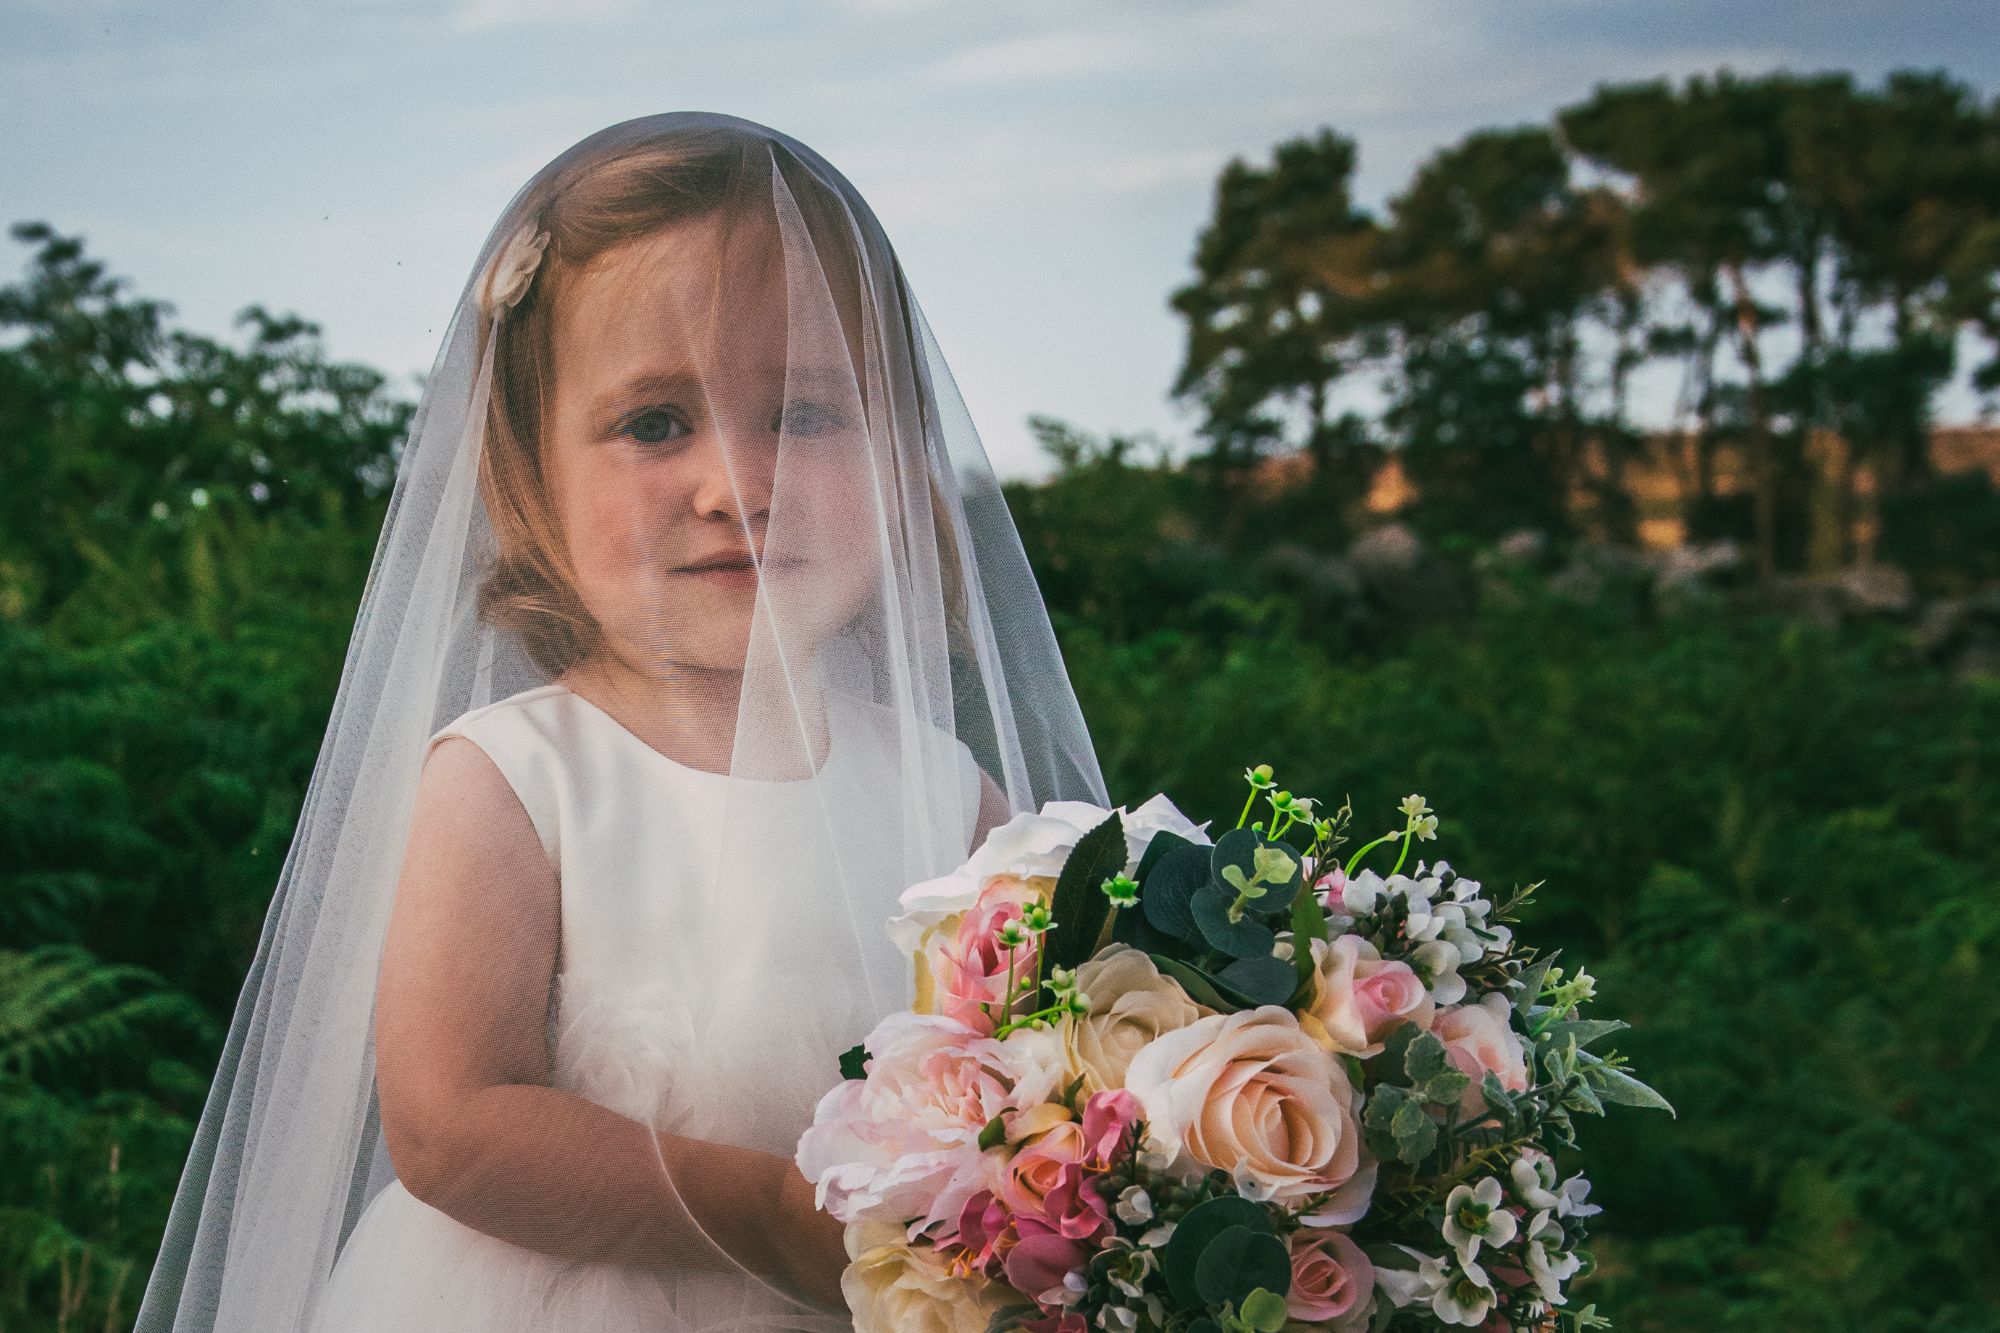 A little girl stands under her mum's veil and holds her bouquet.